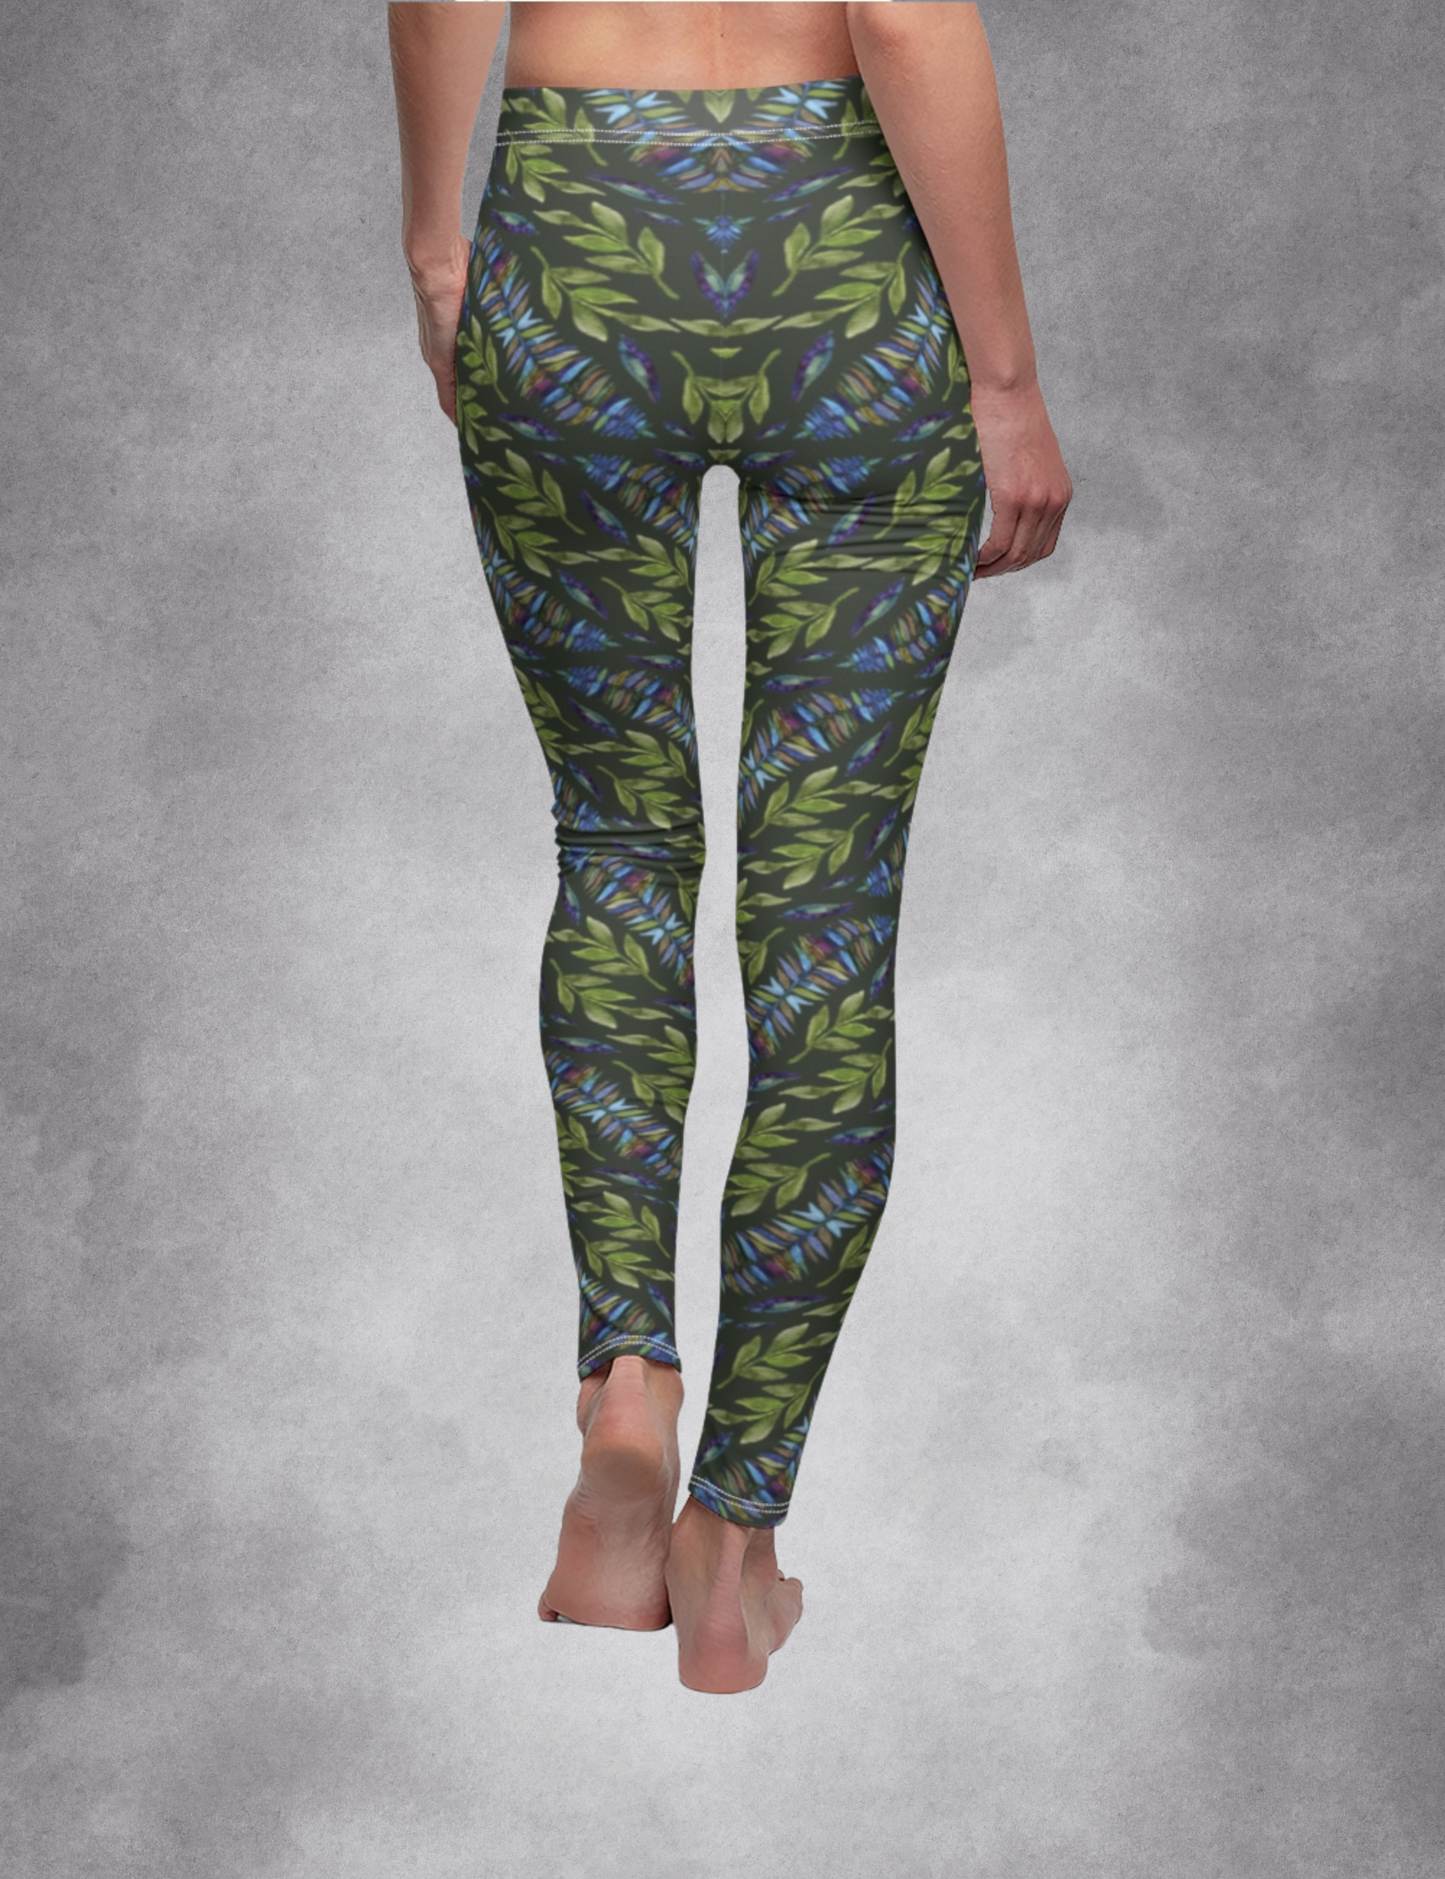 Fairy Grunge Aesthetic Outfits Greenery Leggings